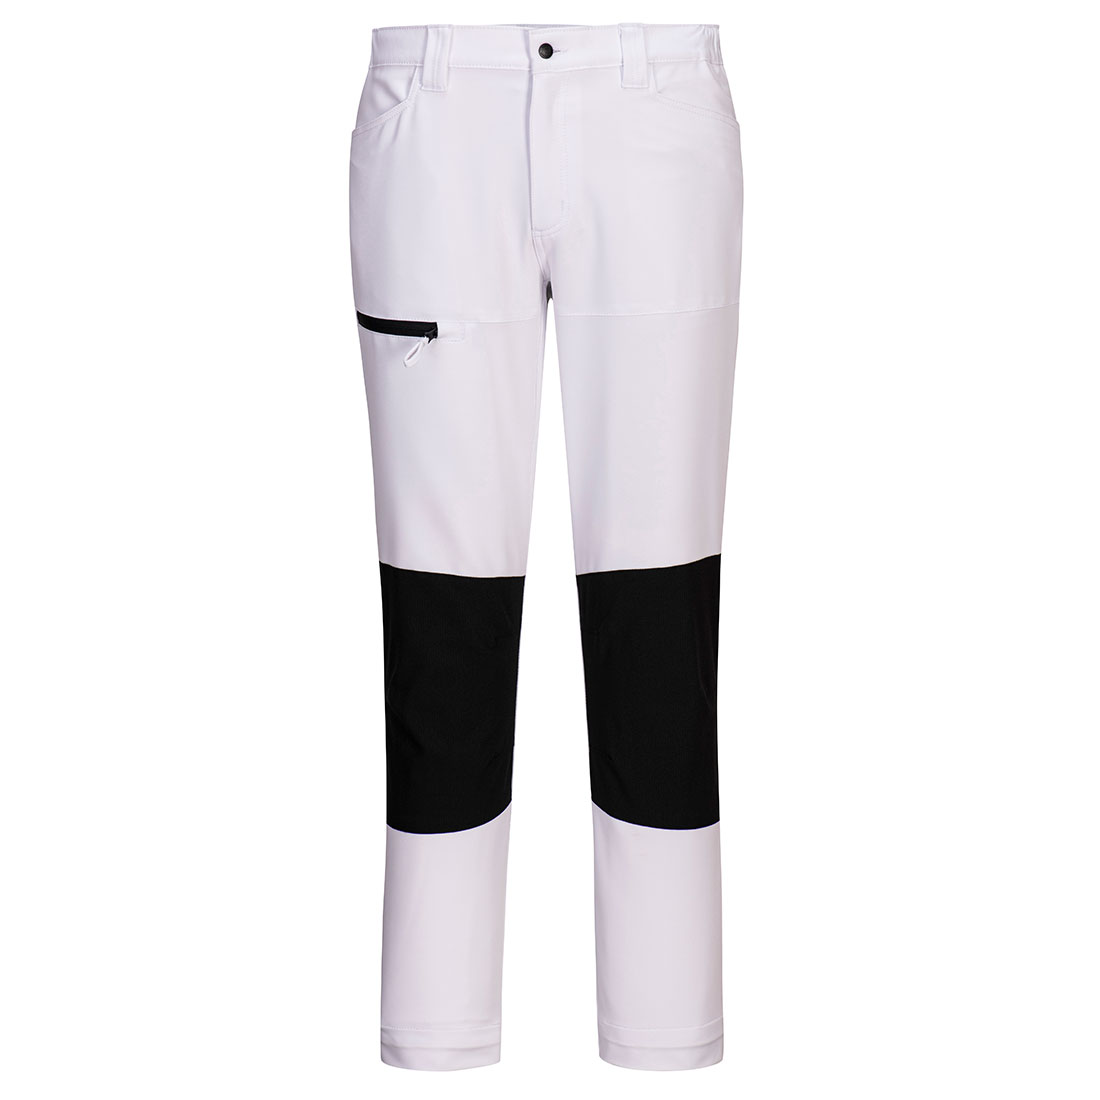 CD886 - WX2 Eco Active Stretch Work Trousers White